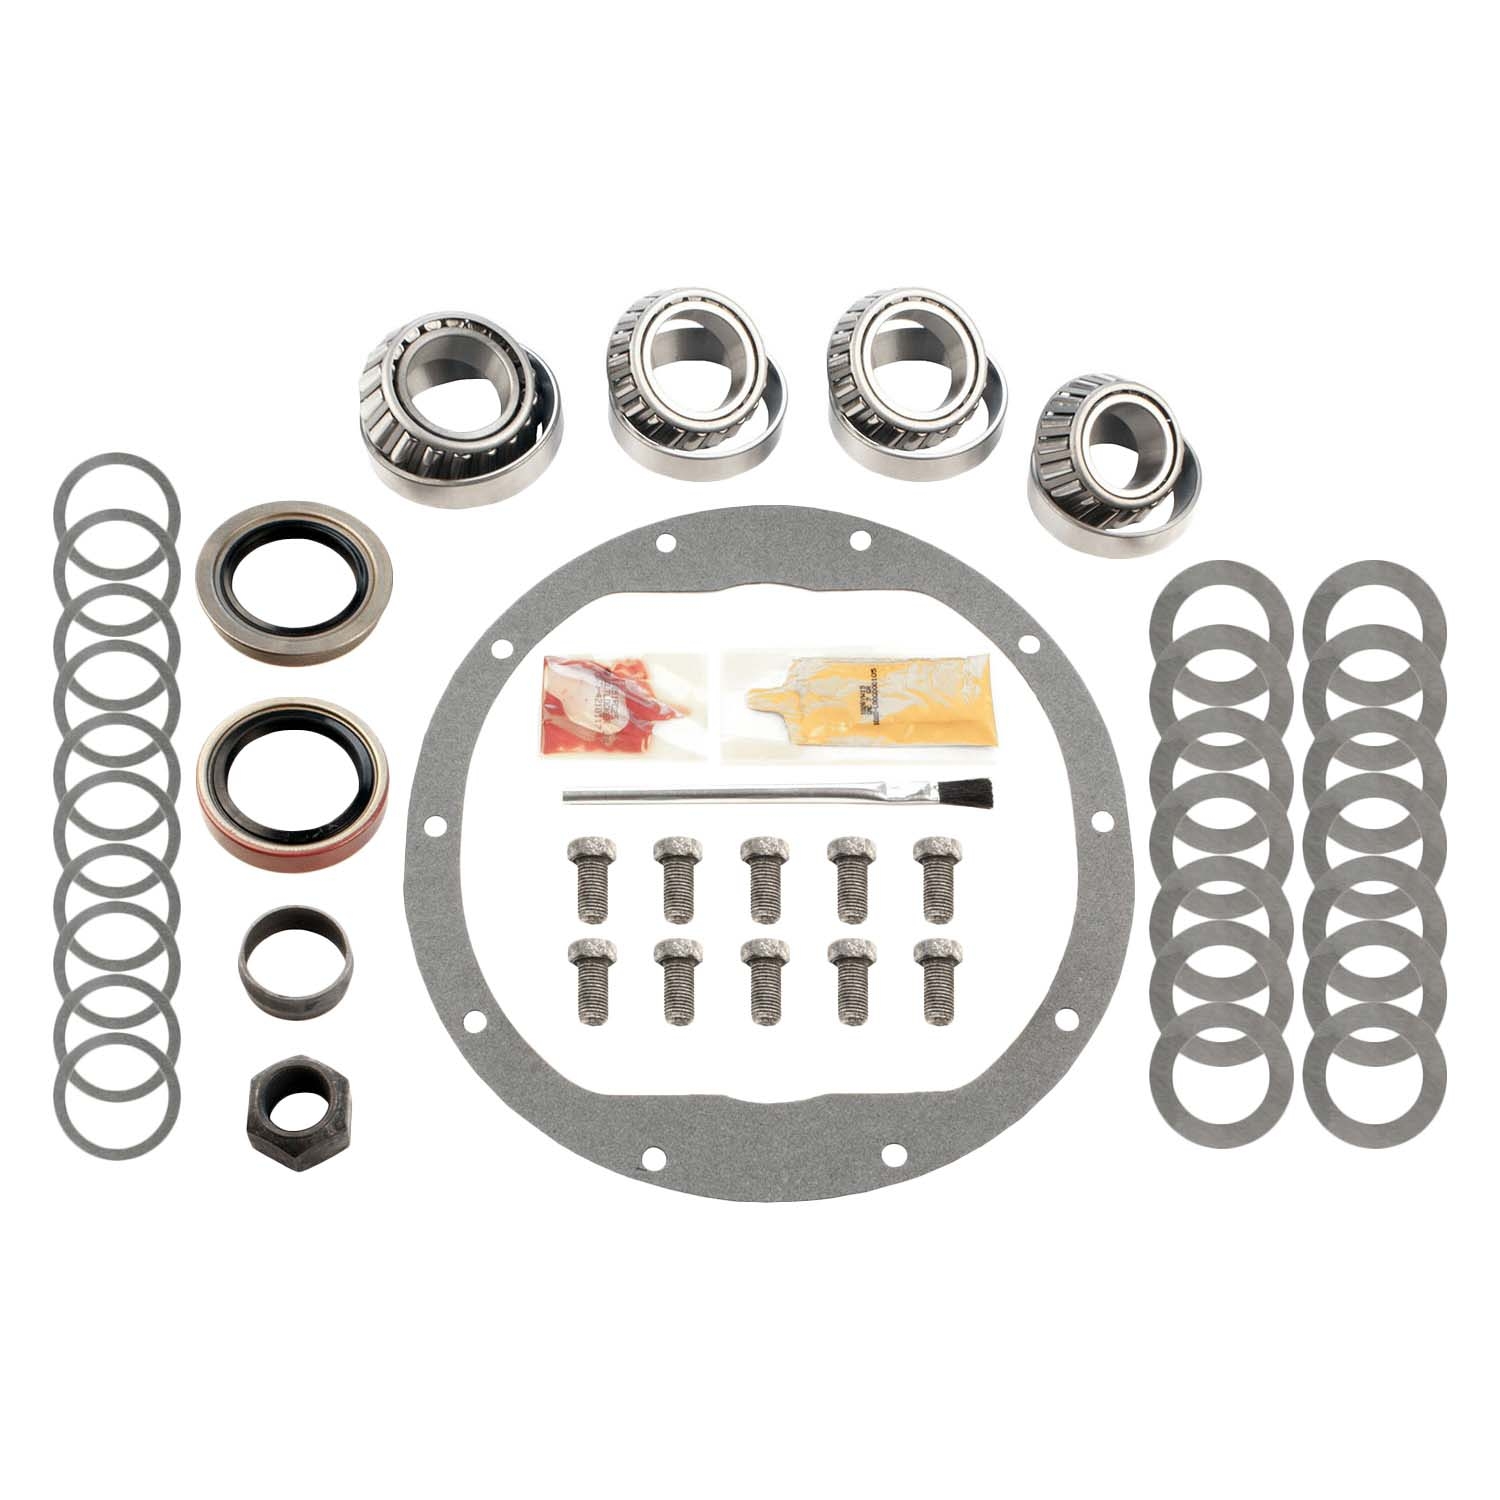 Motive Gear Differential Bearing Kits Gm 8.5 | Mk Gm 8.5 Rr ’70-98 Frt 77-91 | Differential